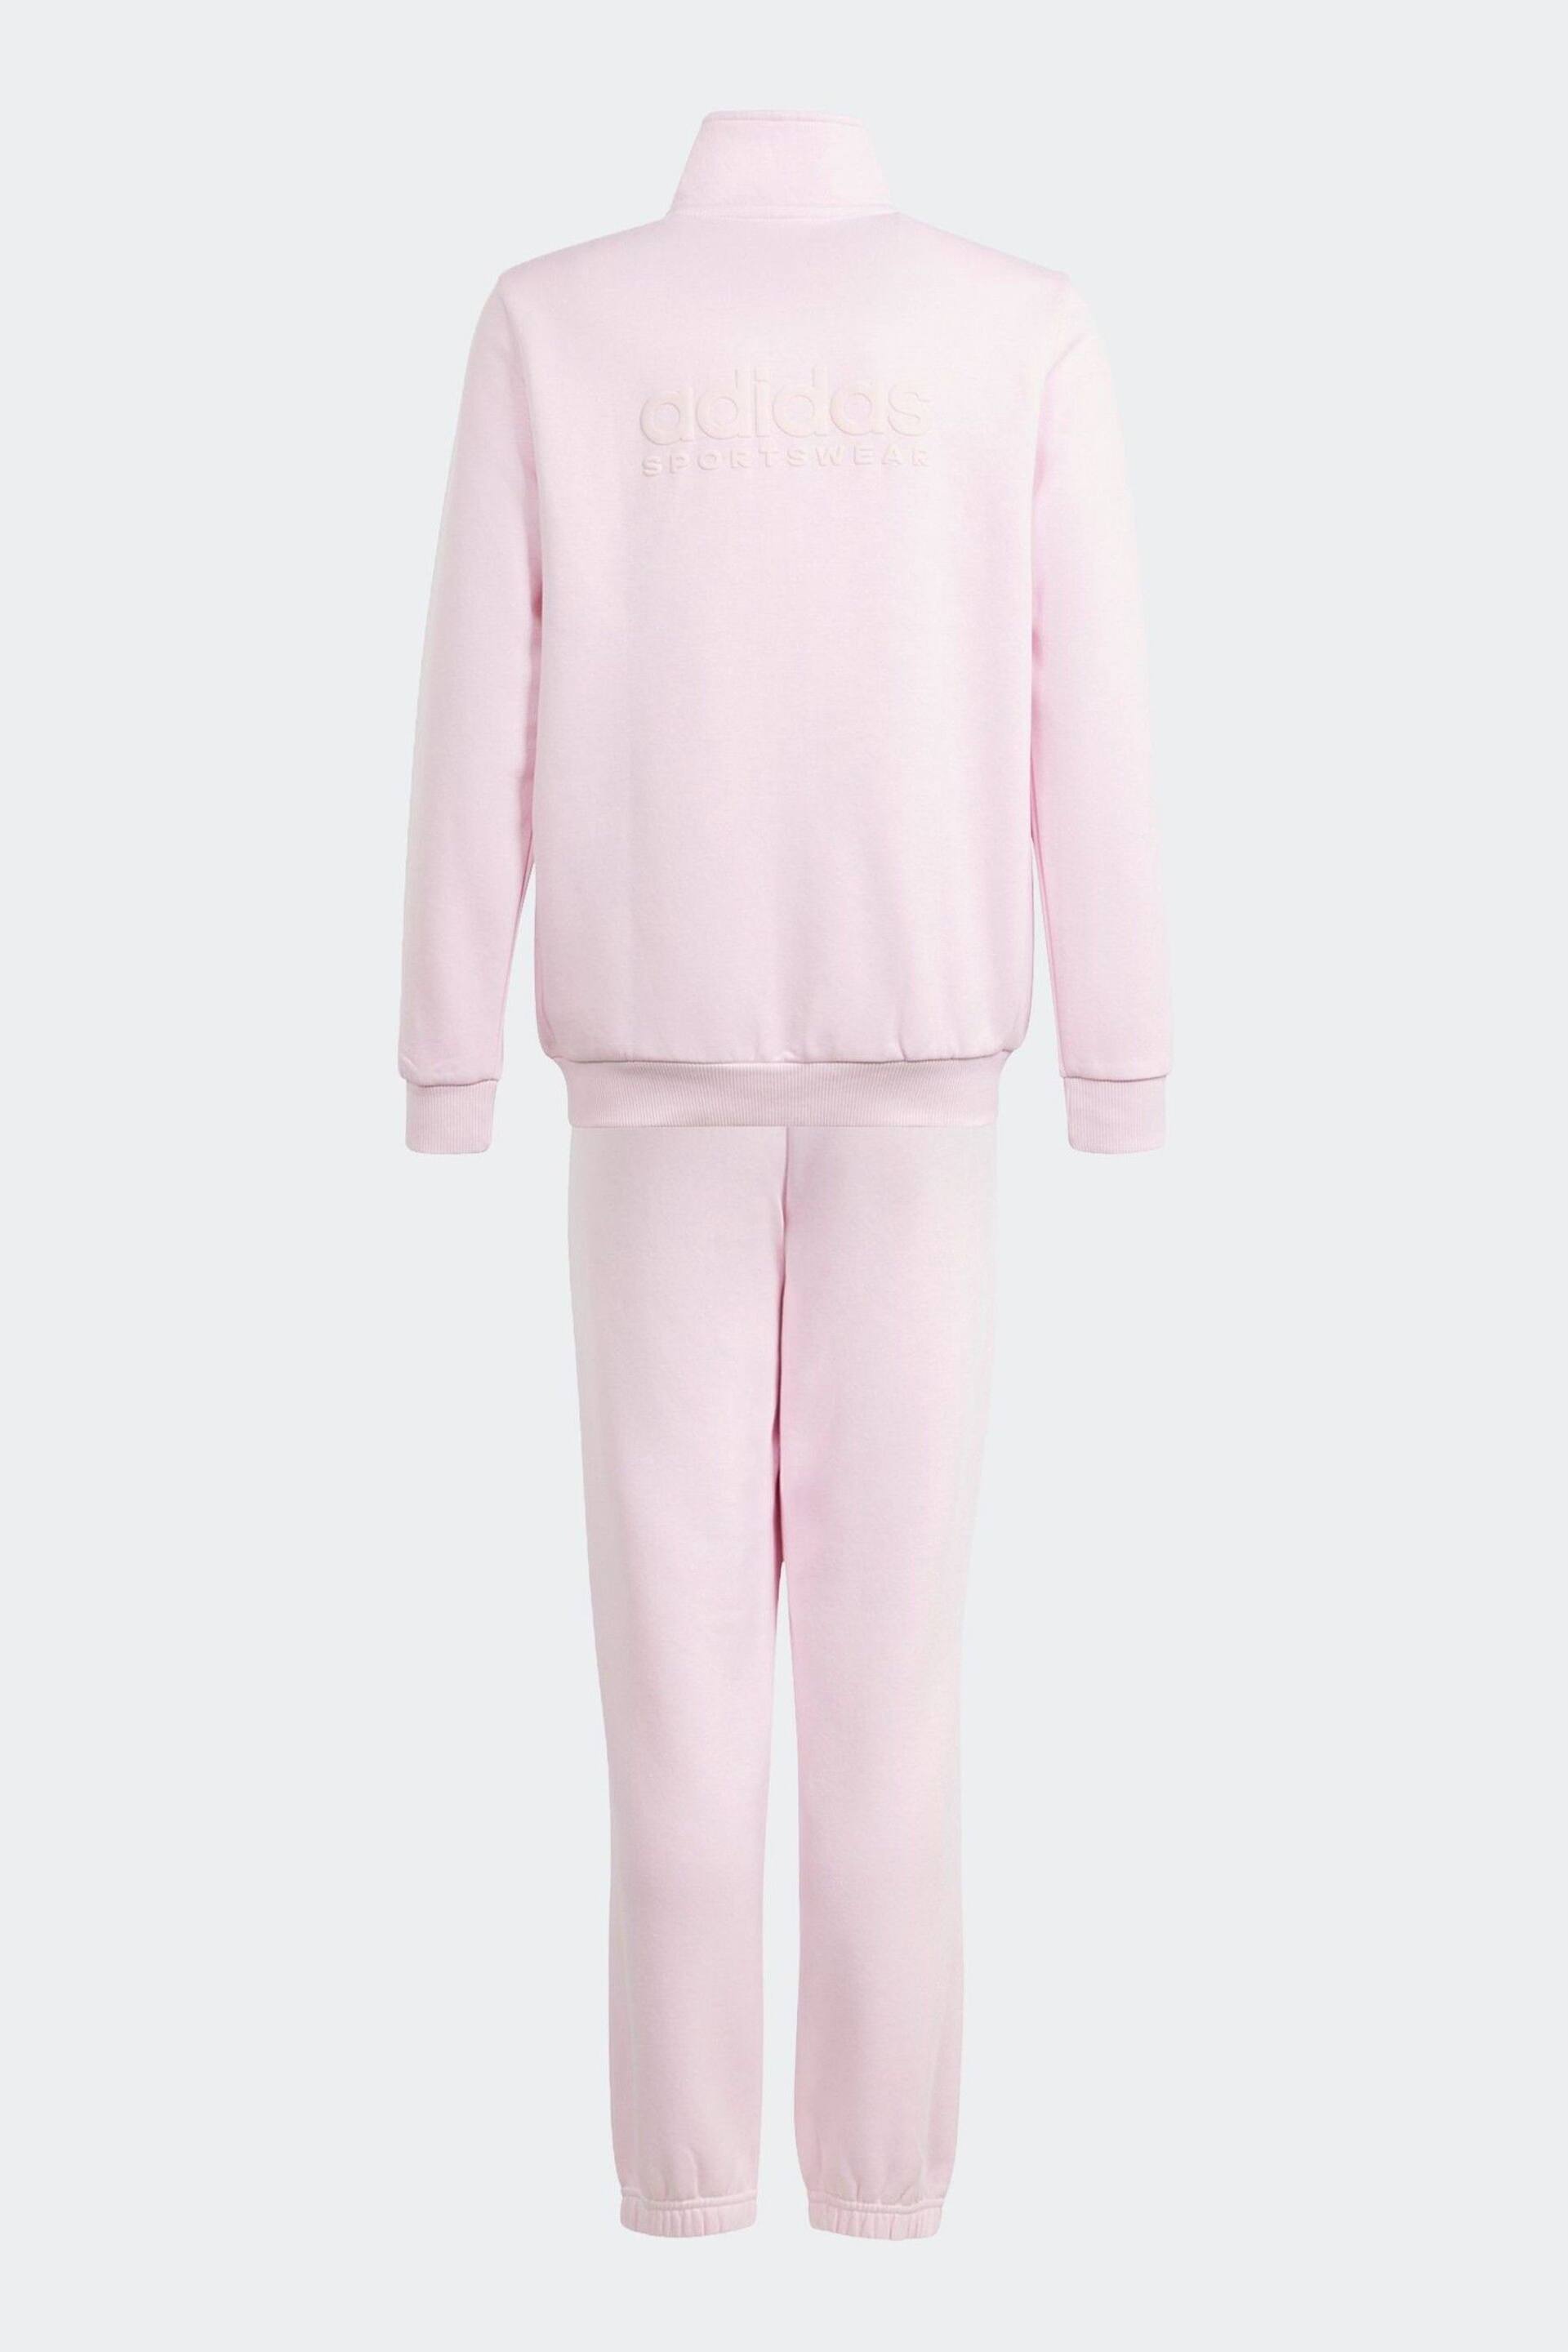 adidas Pink Kids Sportswear All Szn Graphic Tracksuit - Image 2 of 6